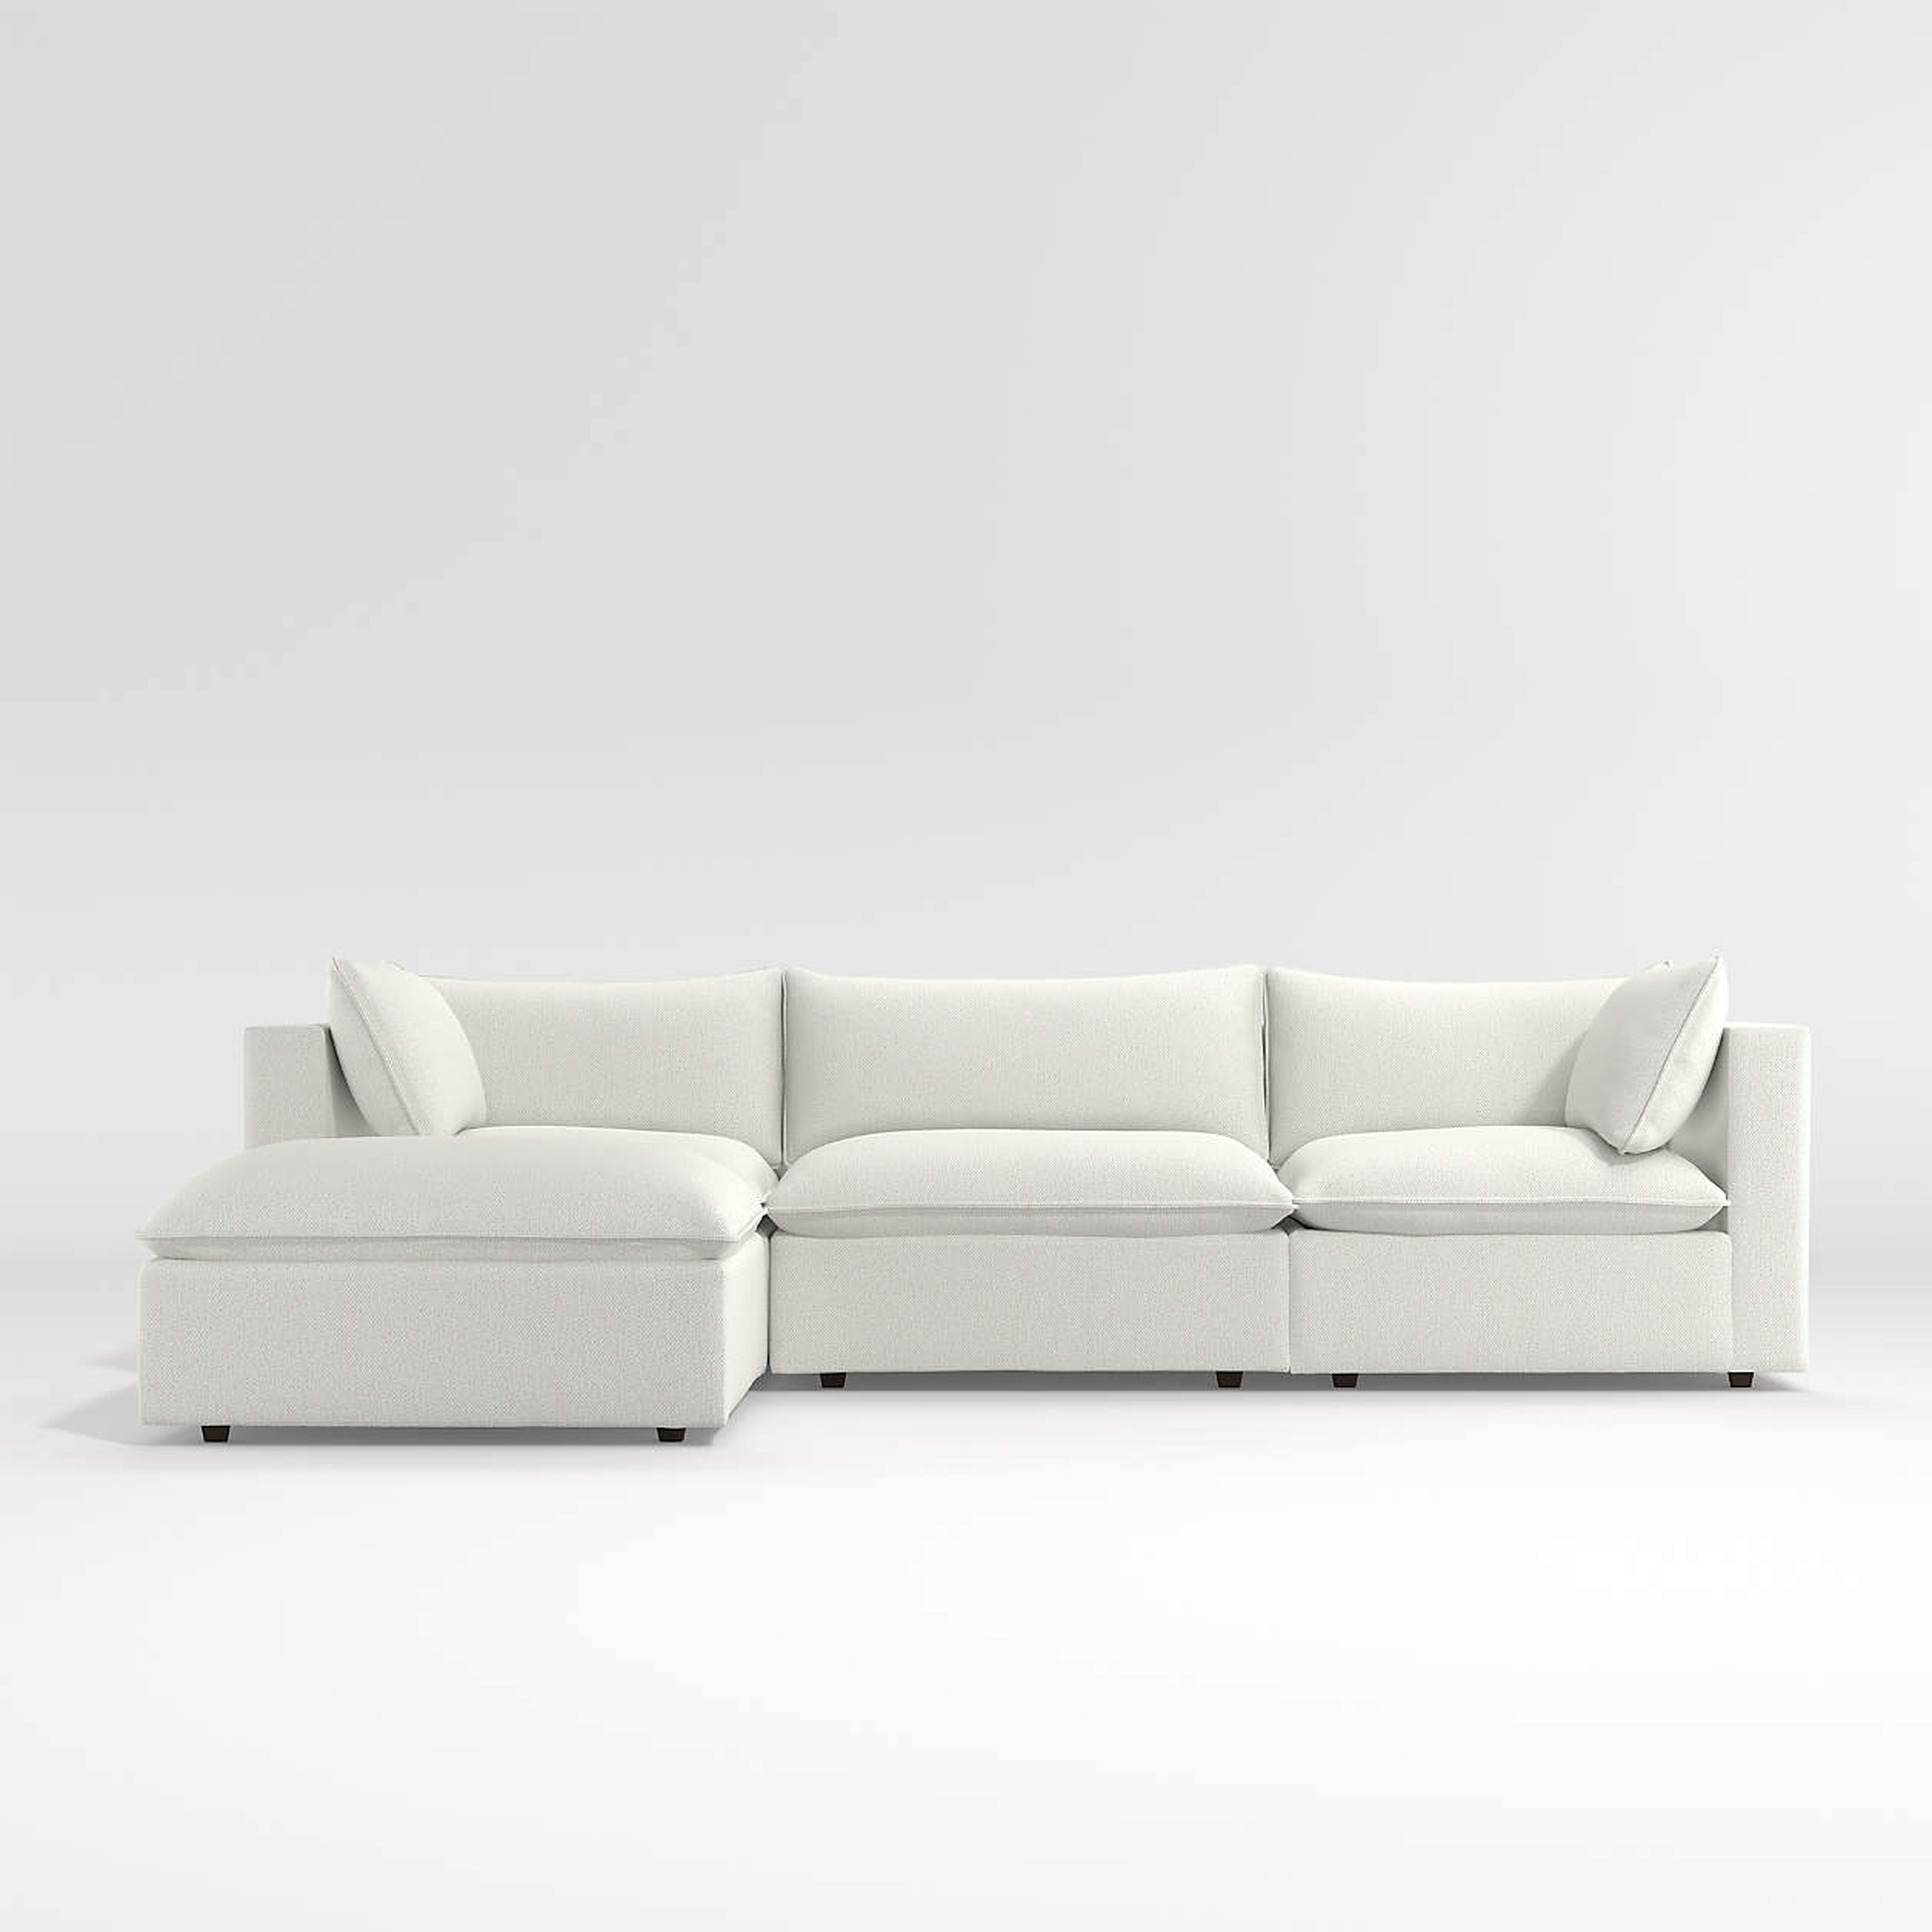 Lotus Deep 4-Piece Reversible Sectional with Ottoman - Crate and Barrel